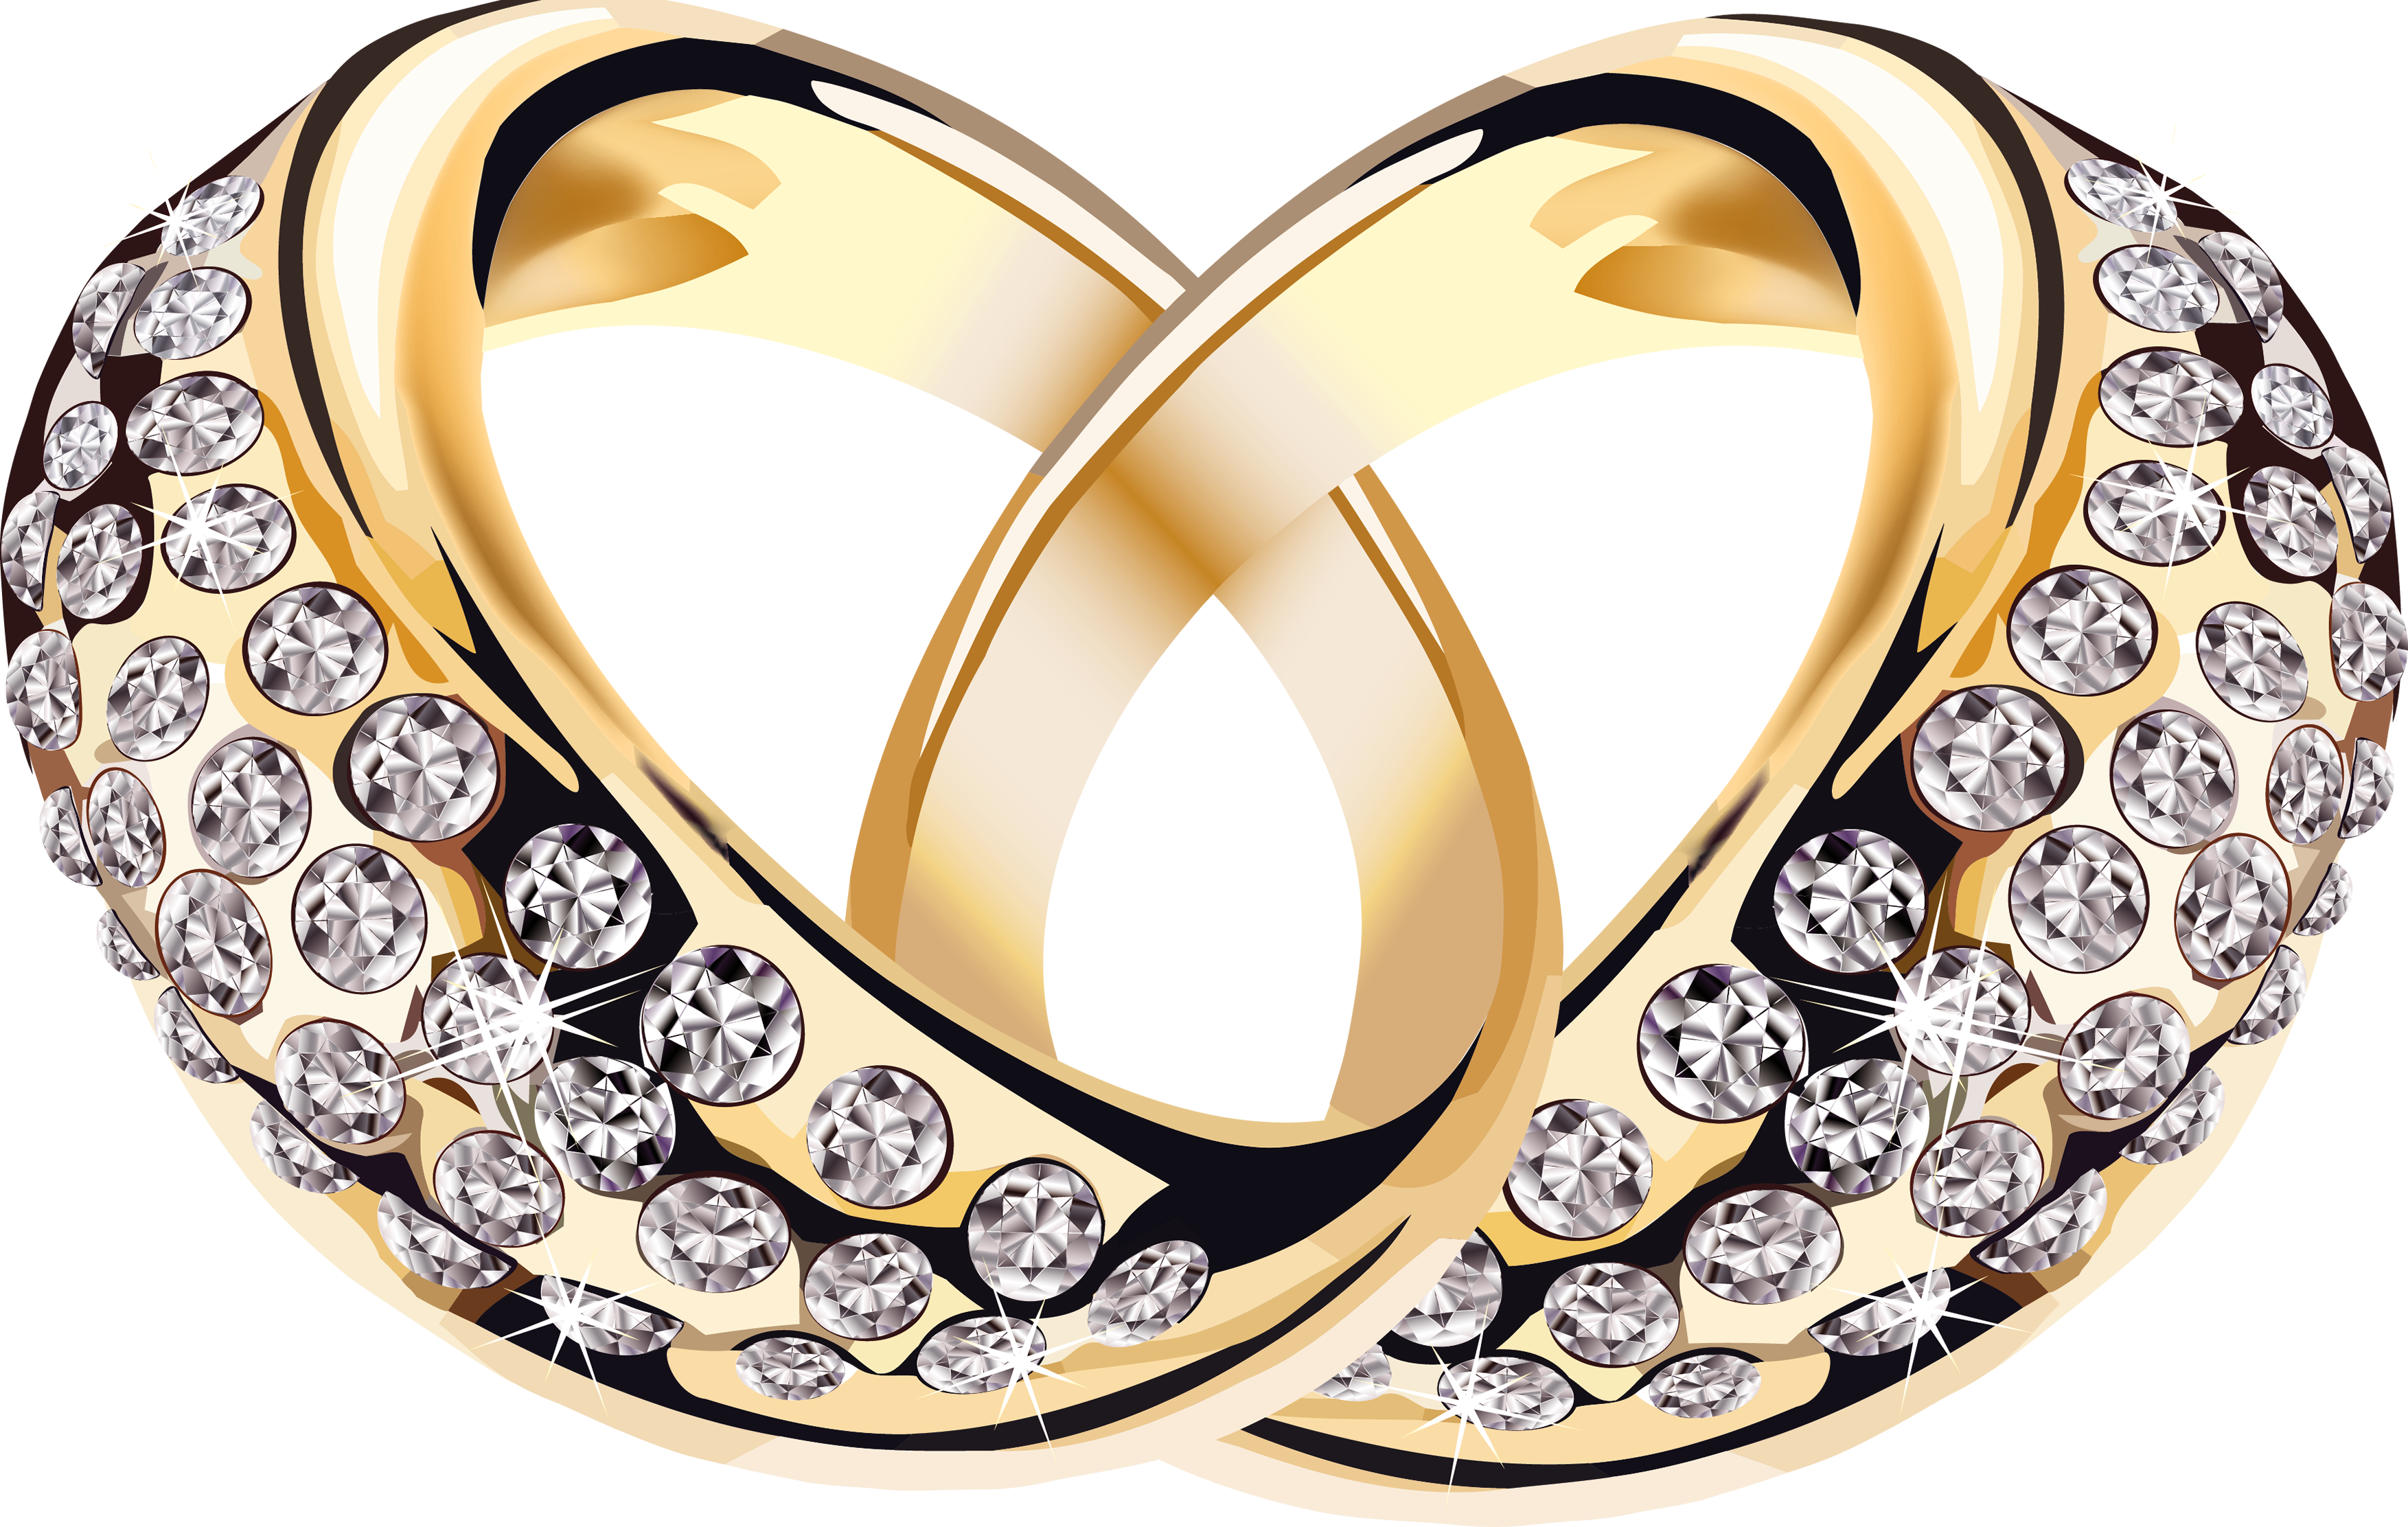 Jewelry Png Image   Jewellary Hd Png - Jewelry Images, Transparent background PNG HD thumbnail